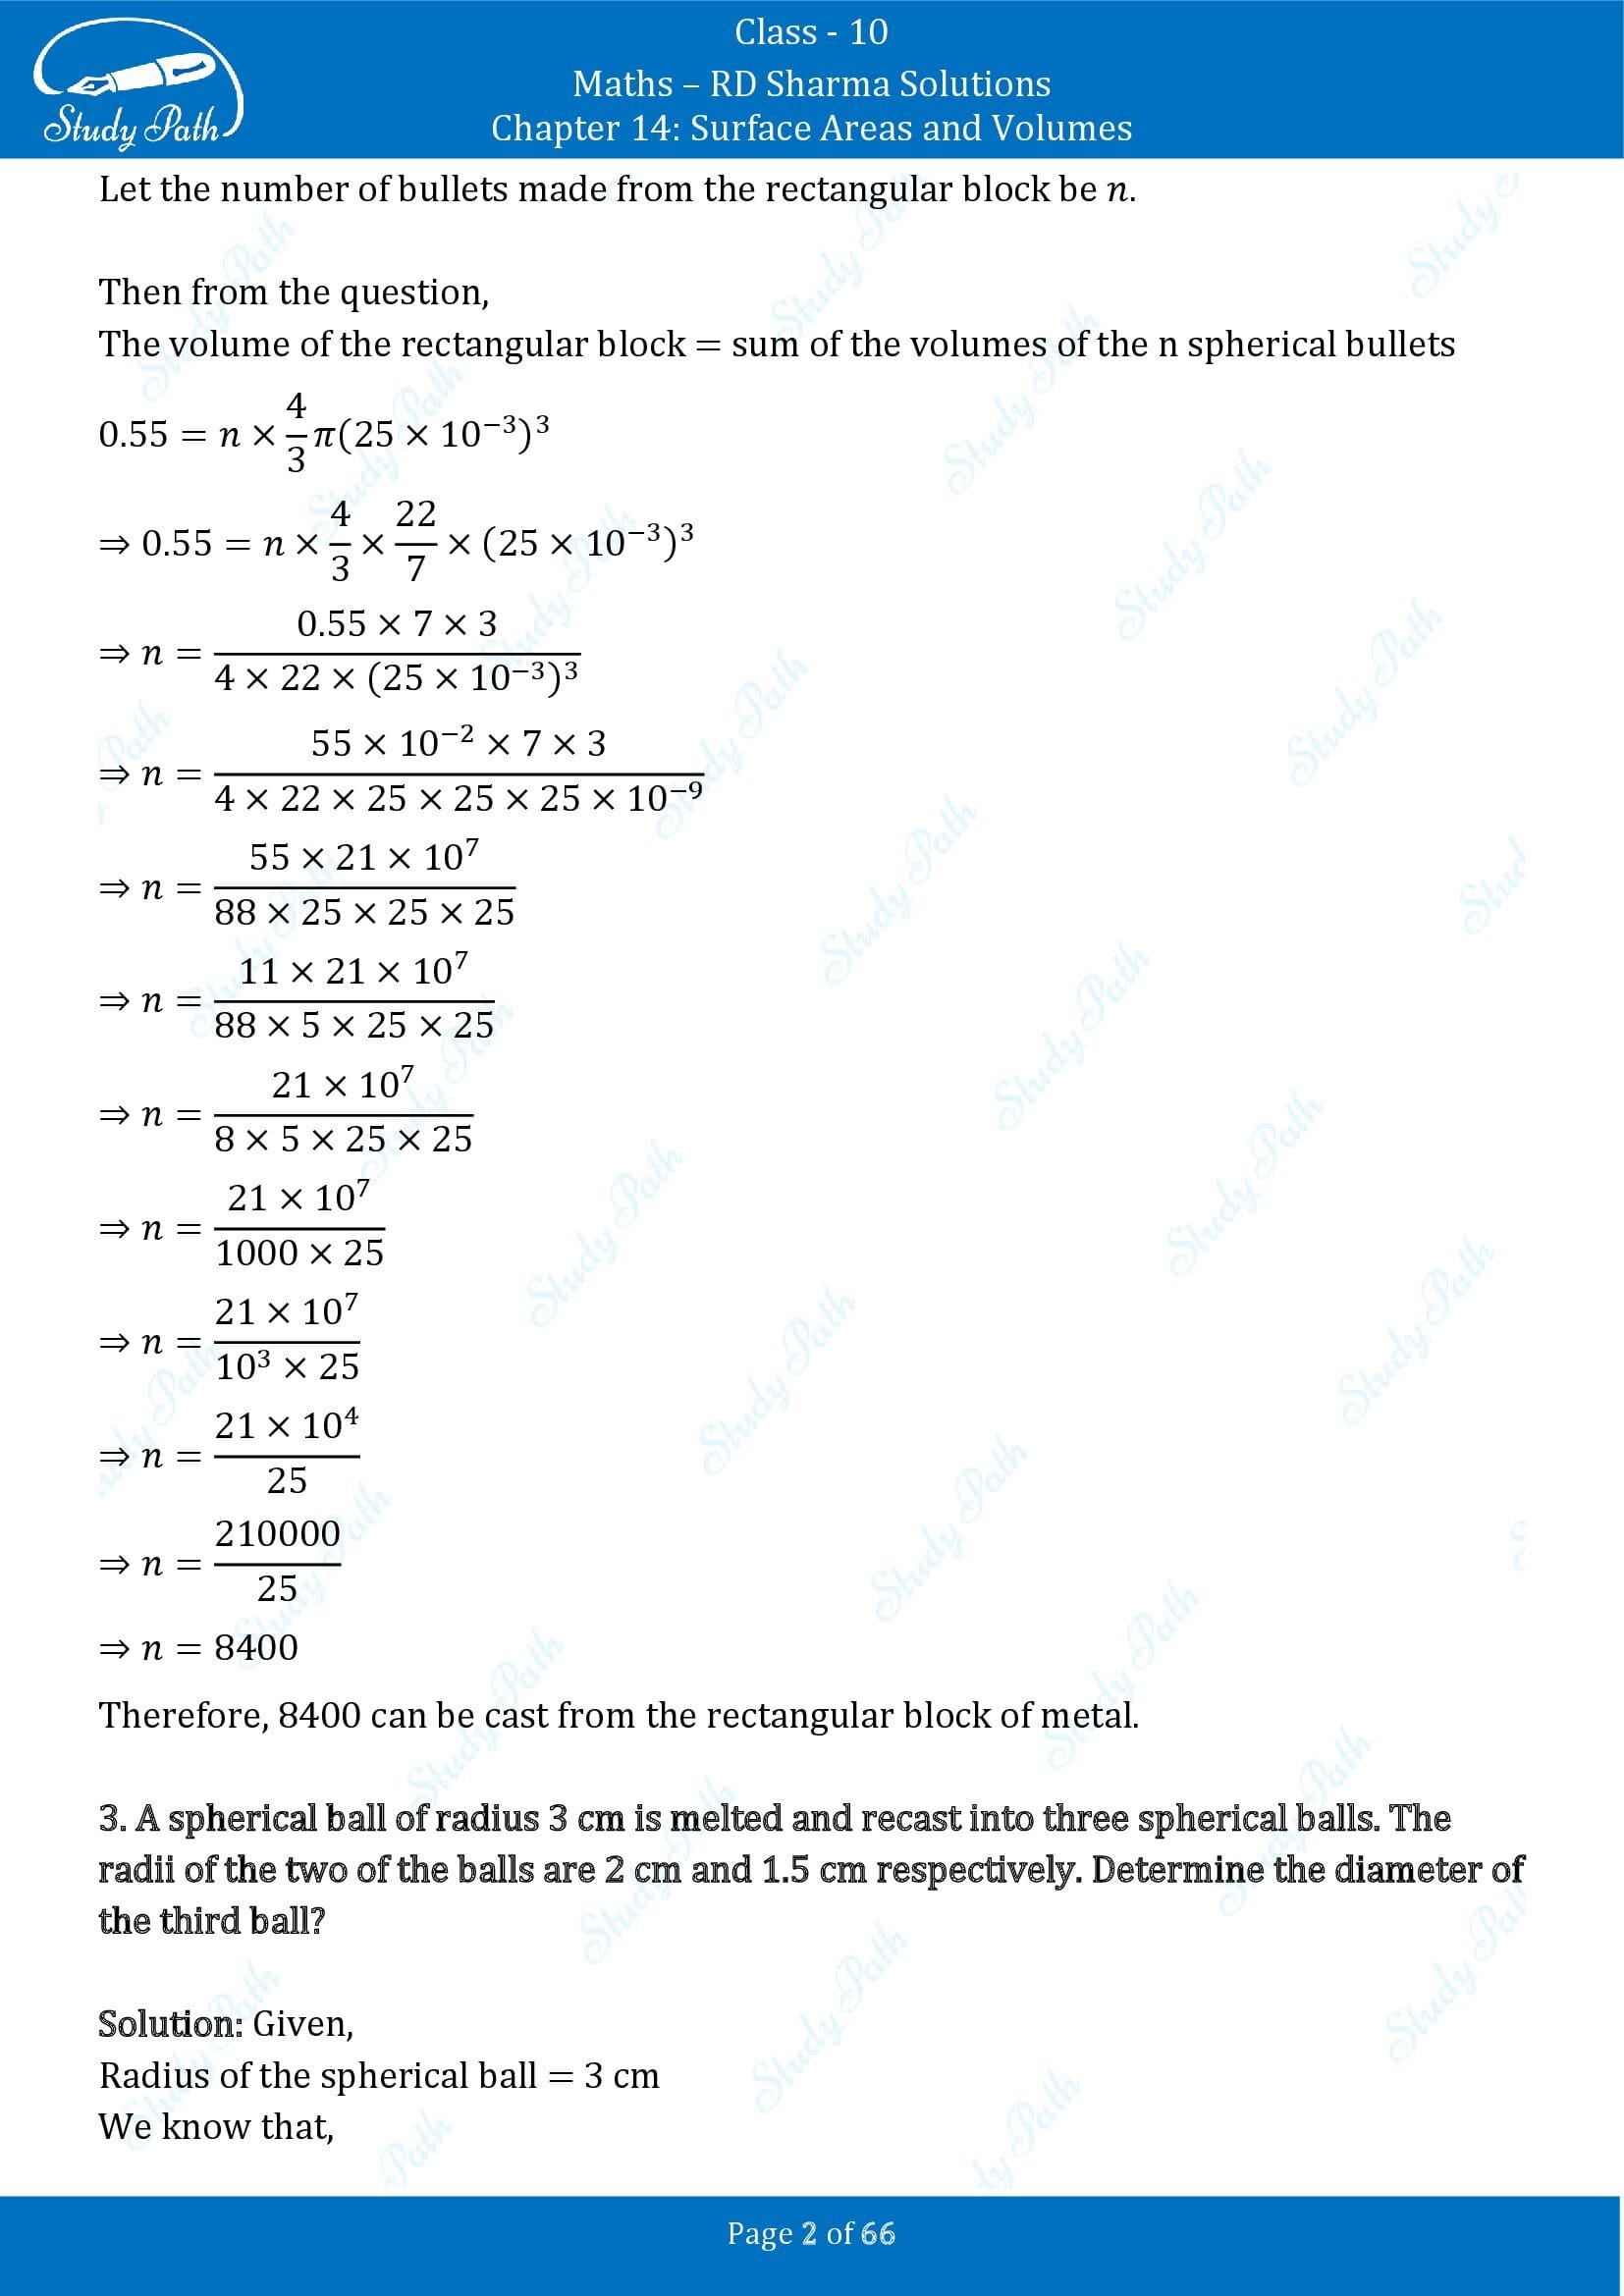 RD Sharma Solutions Class 10 Chapter 14 Surface Areas and Volumes Exercise 14.1 00002